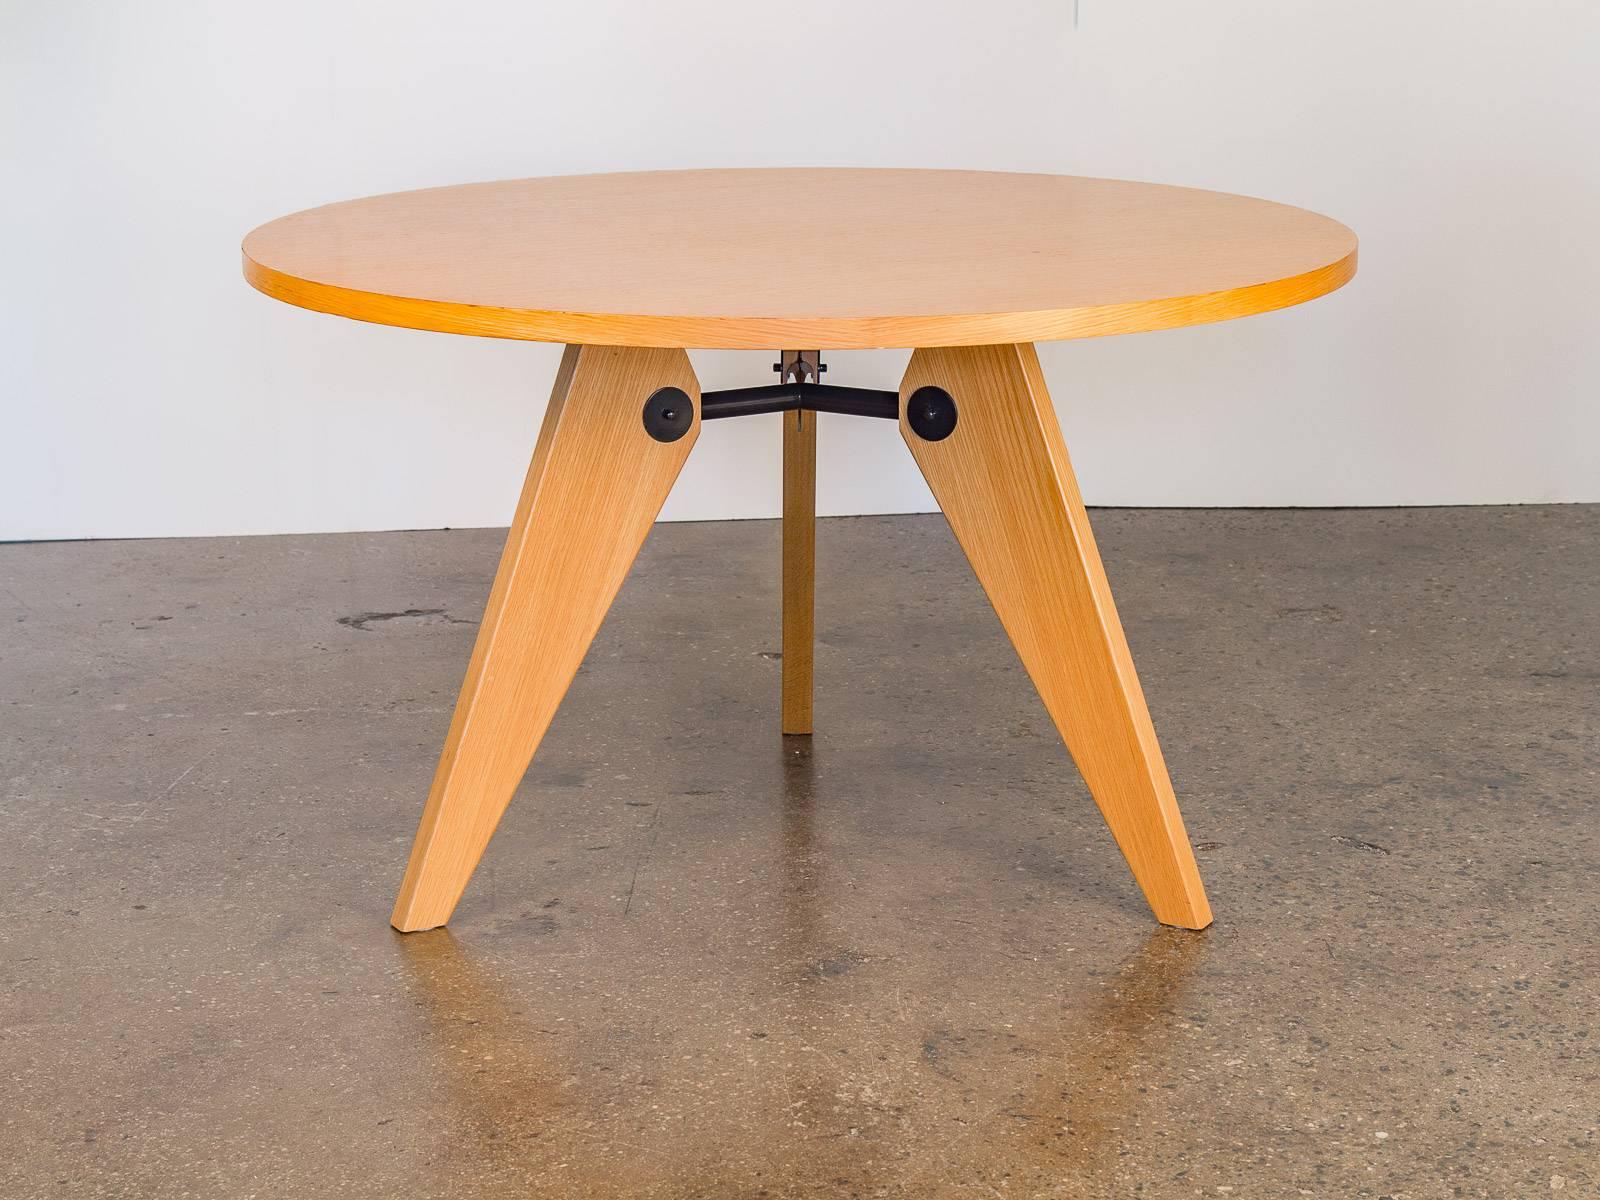 Stunning Jean Prouvé Gueridon Table for Vitra from 2002. This round 47-inch wide, 1.75 thick, oak veneer tabletop is supported by a black steel, tripod brace. Three diagonally cut legs are fixed to the base for equal weight distribution. This